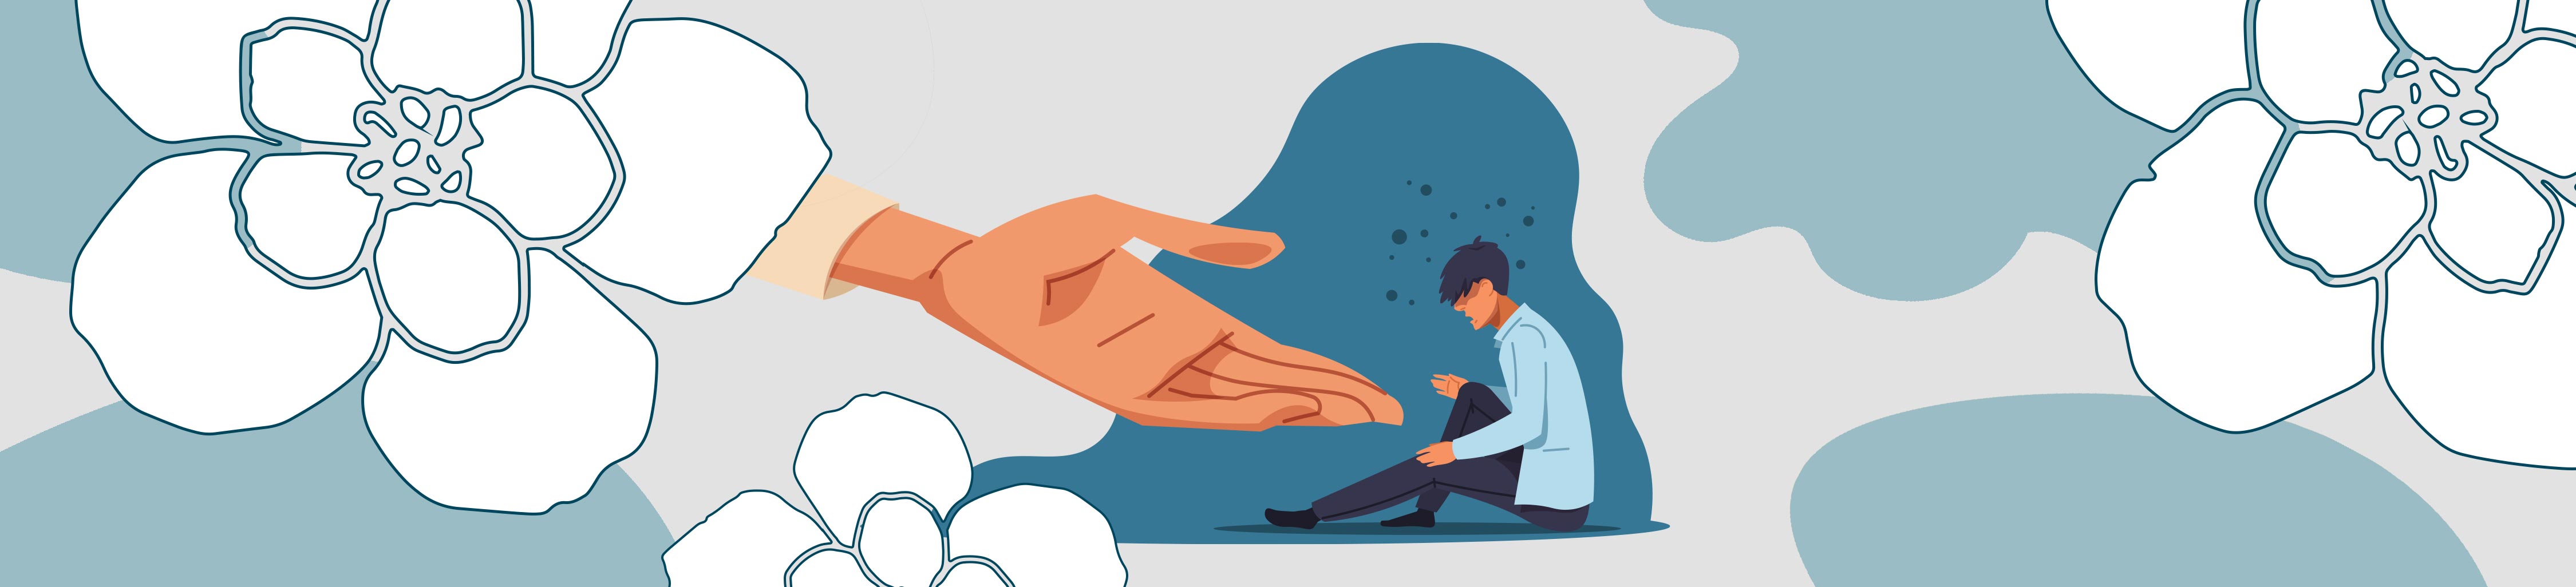 Illustration of a depressed man being offered a hand up.